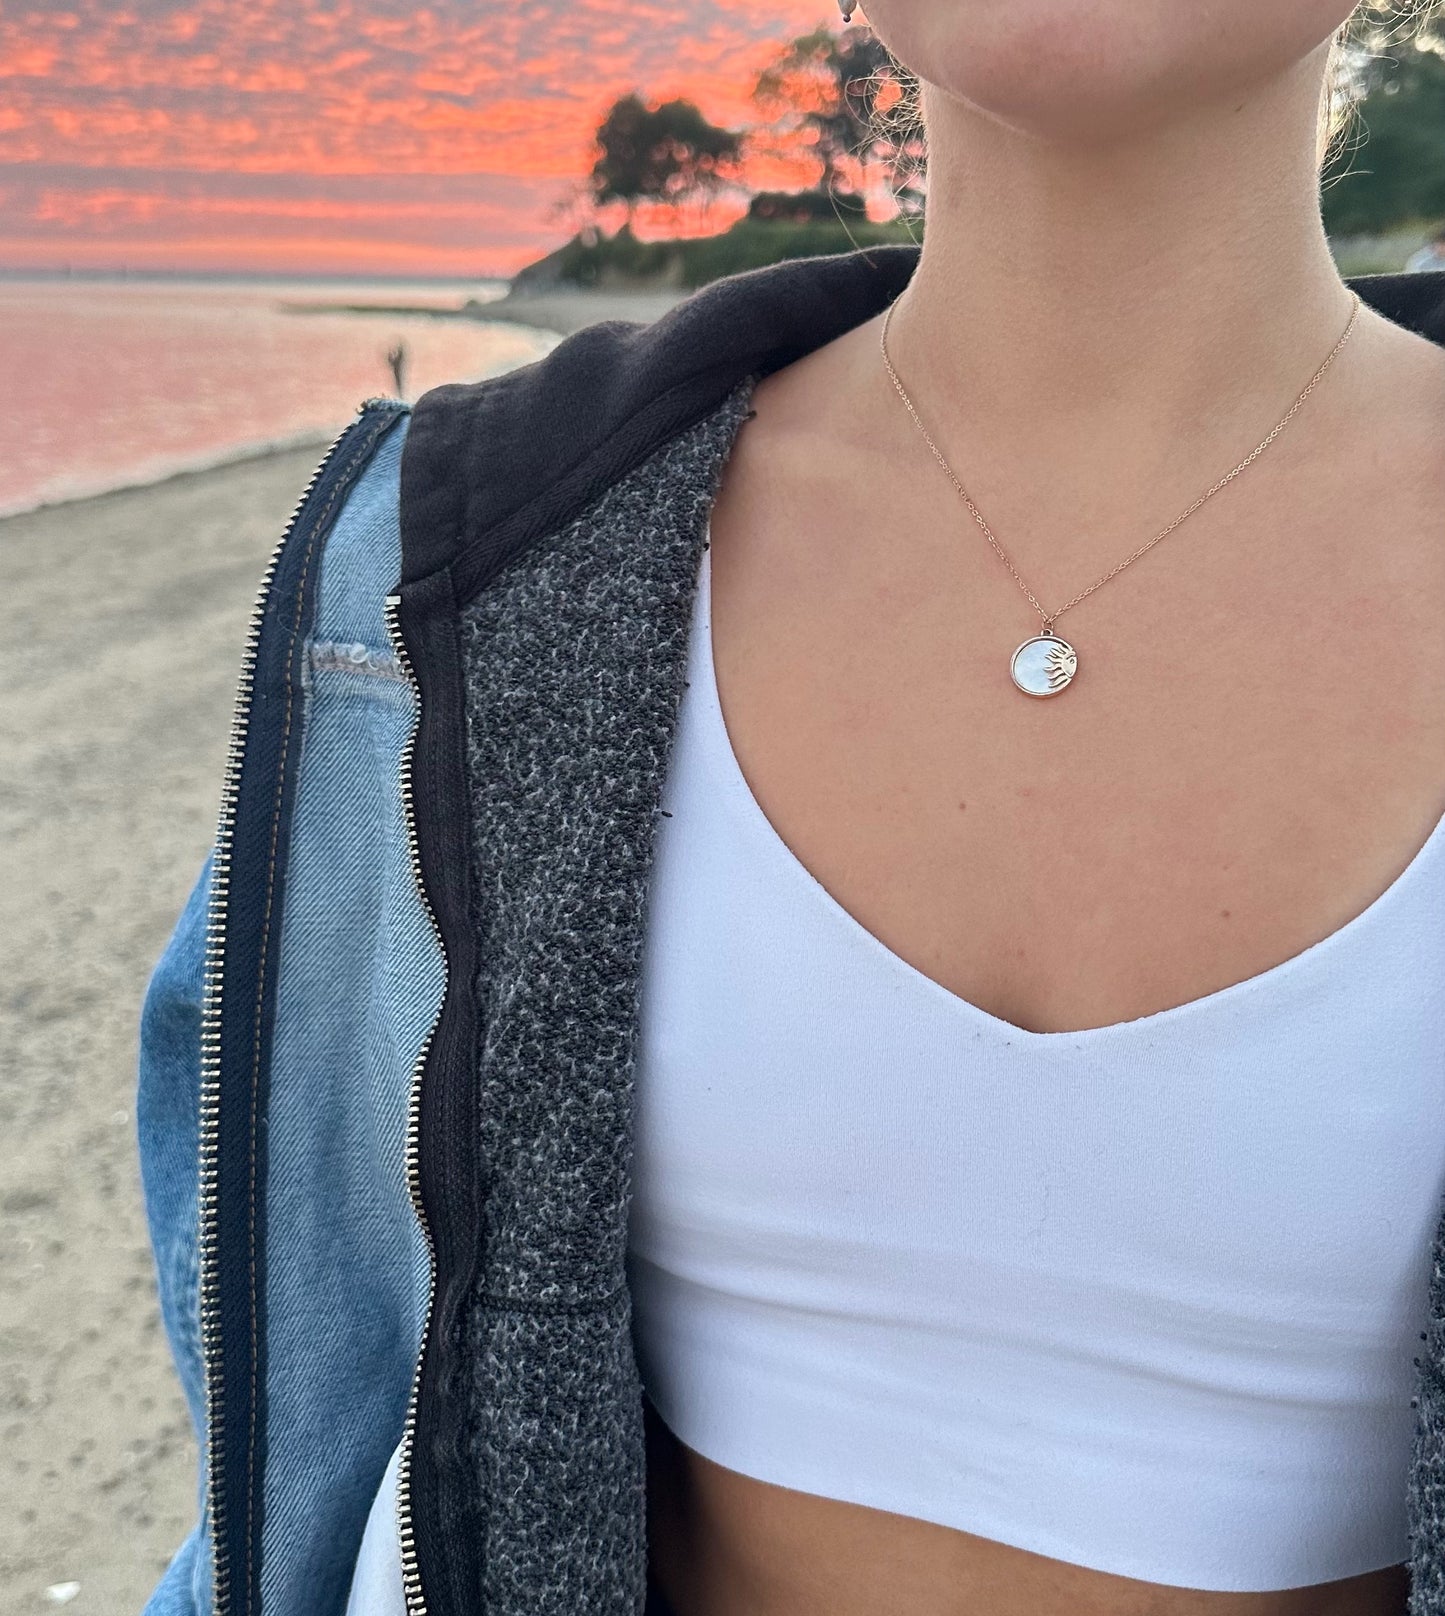 Sunkissed glow necklace